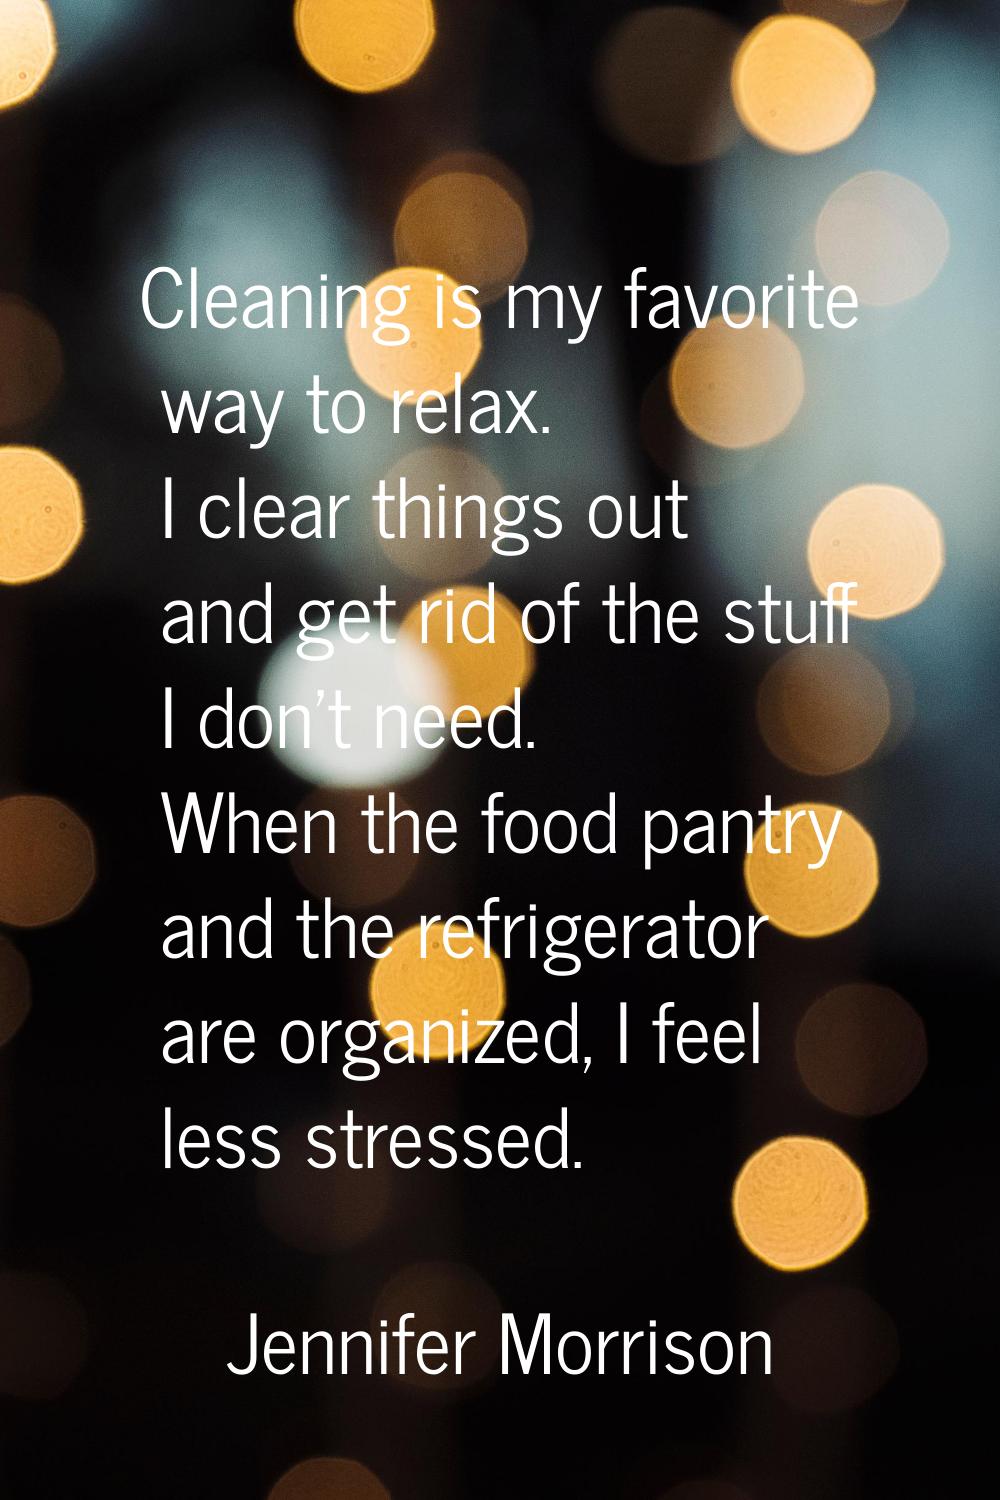 Cleaning is my favorite way to relax. I clear things out and get rid of the stuff I don't need. Whe